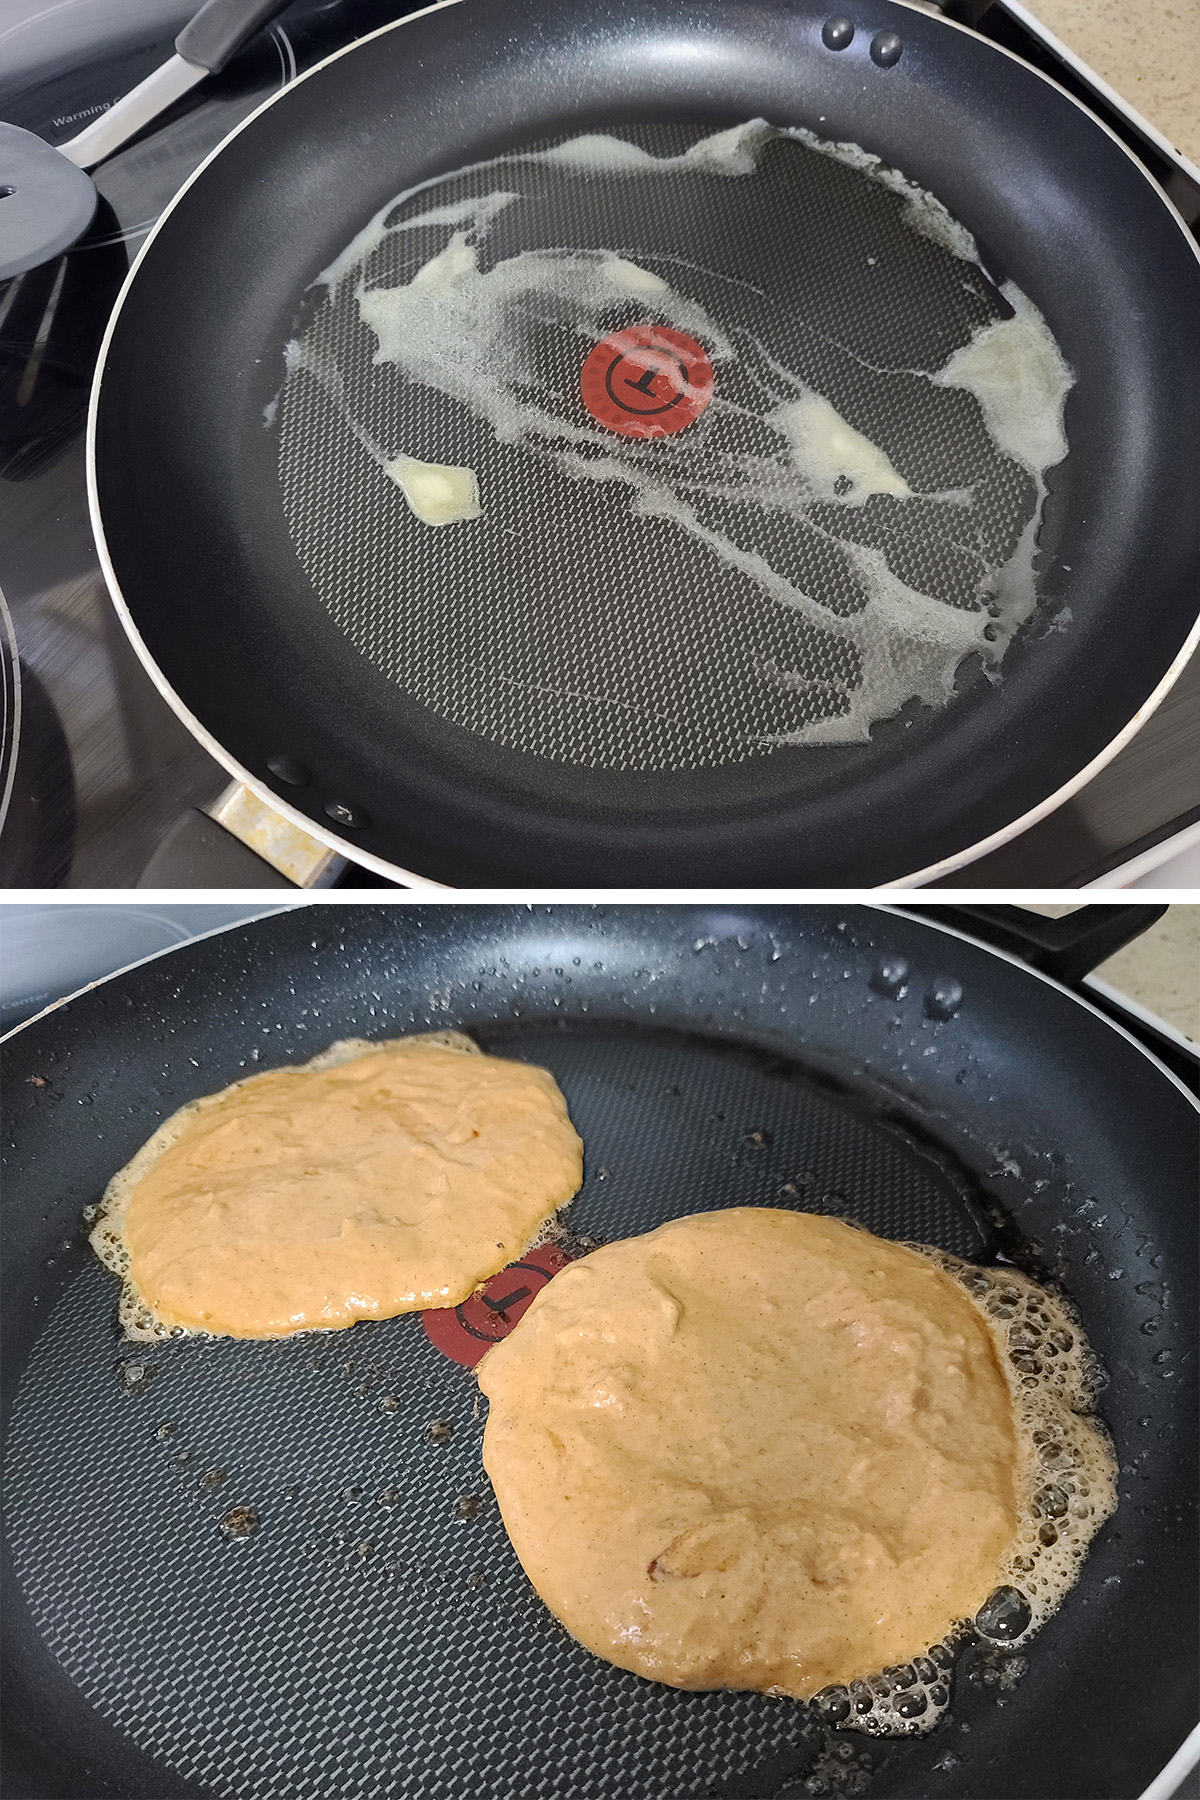 Butter melted in a nonstick pan, batter poured in to make 2 pancakes.